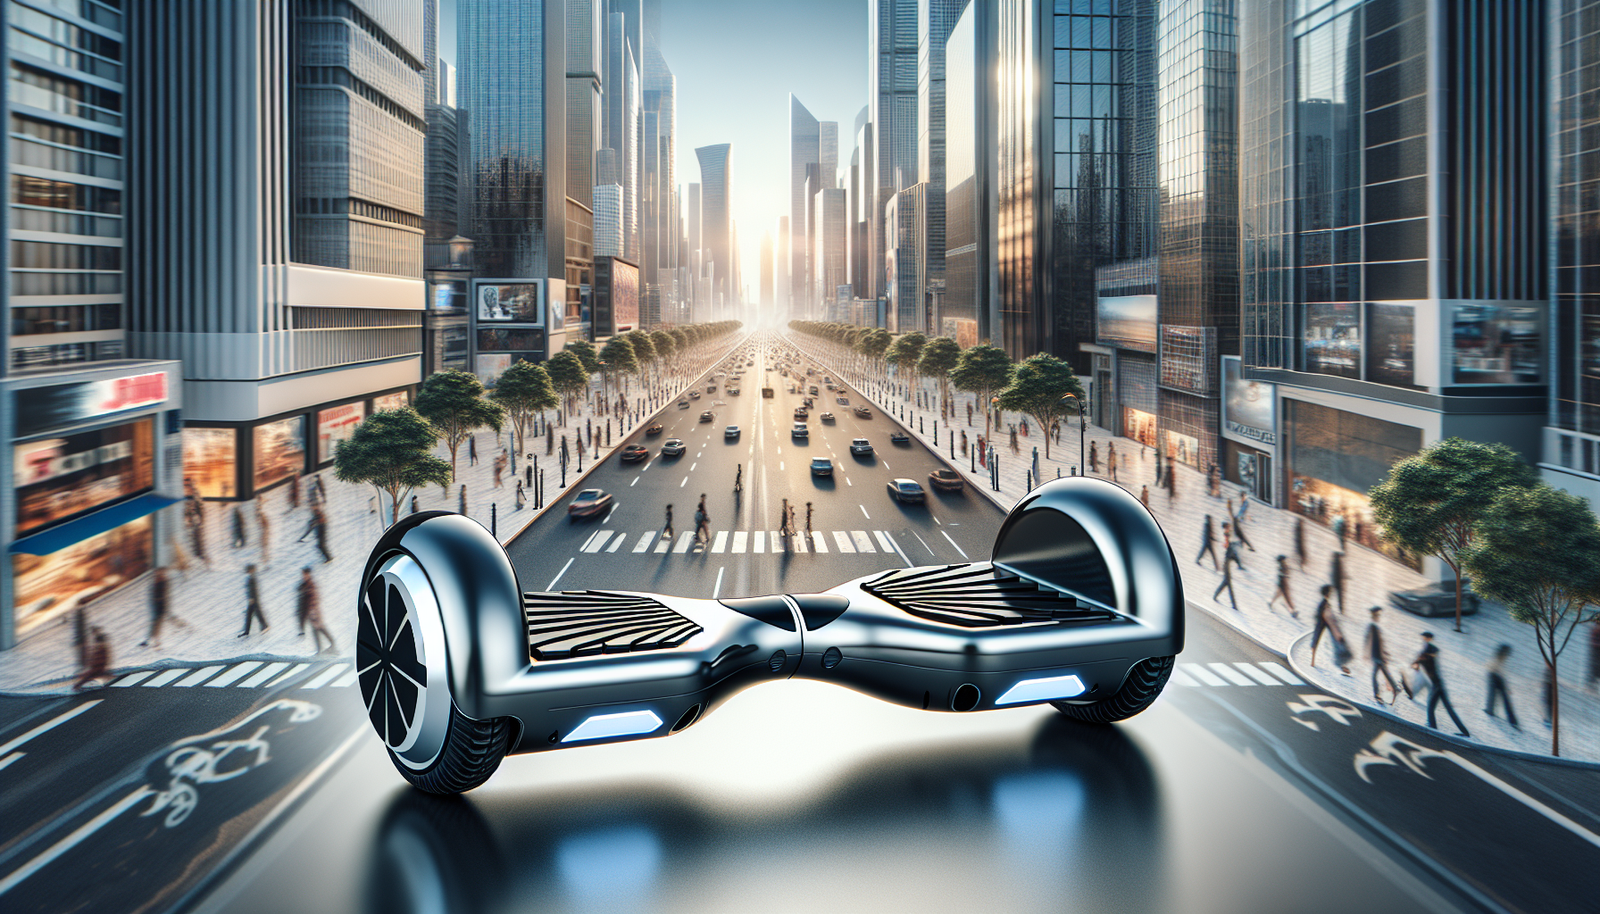 Can I Use A Hoverboard For Rideshare Services Like Uber Or Lyft?